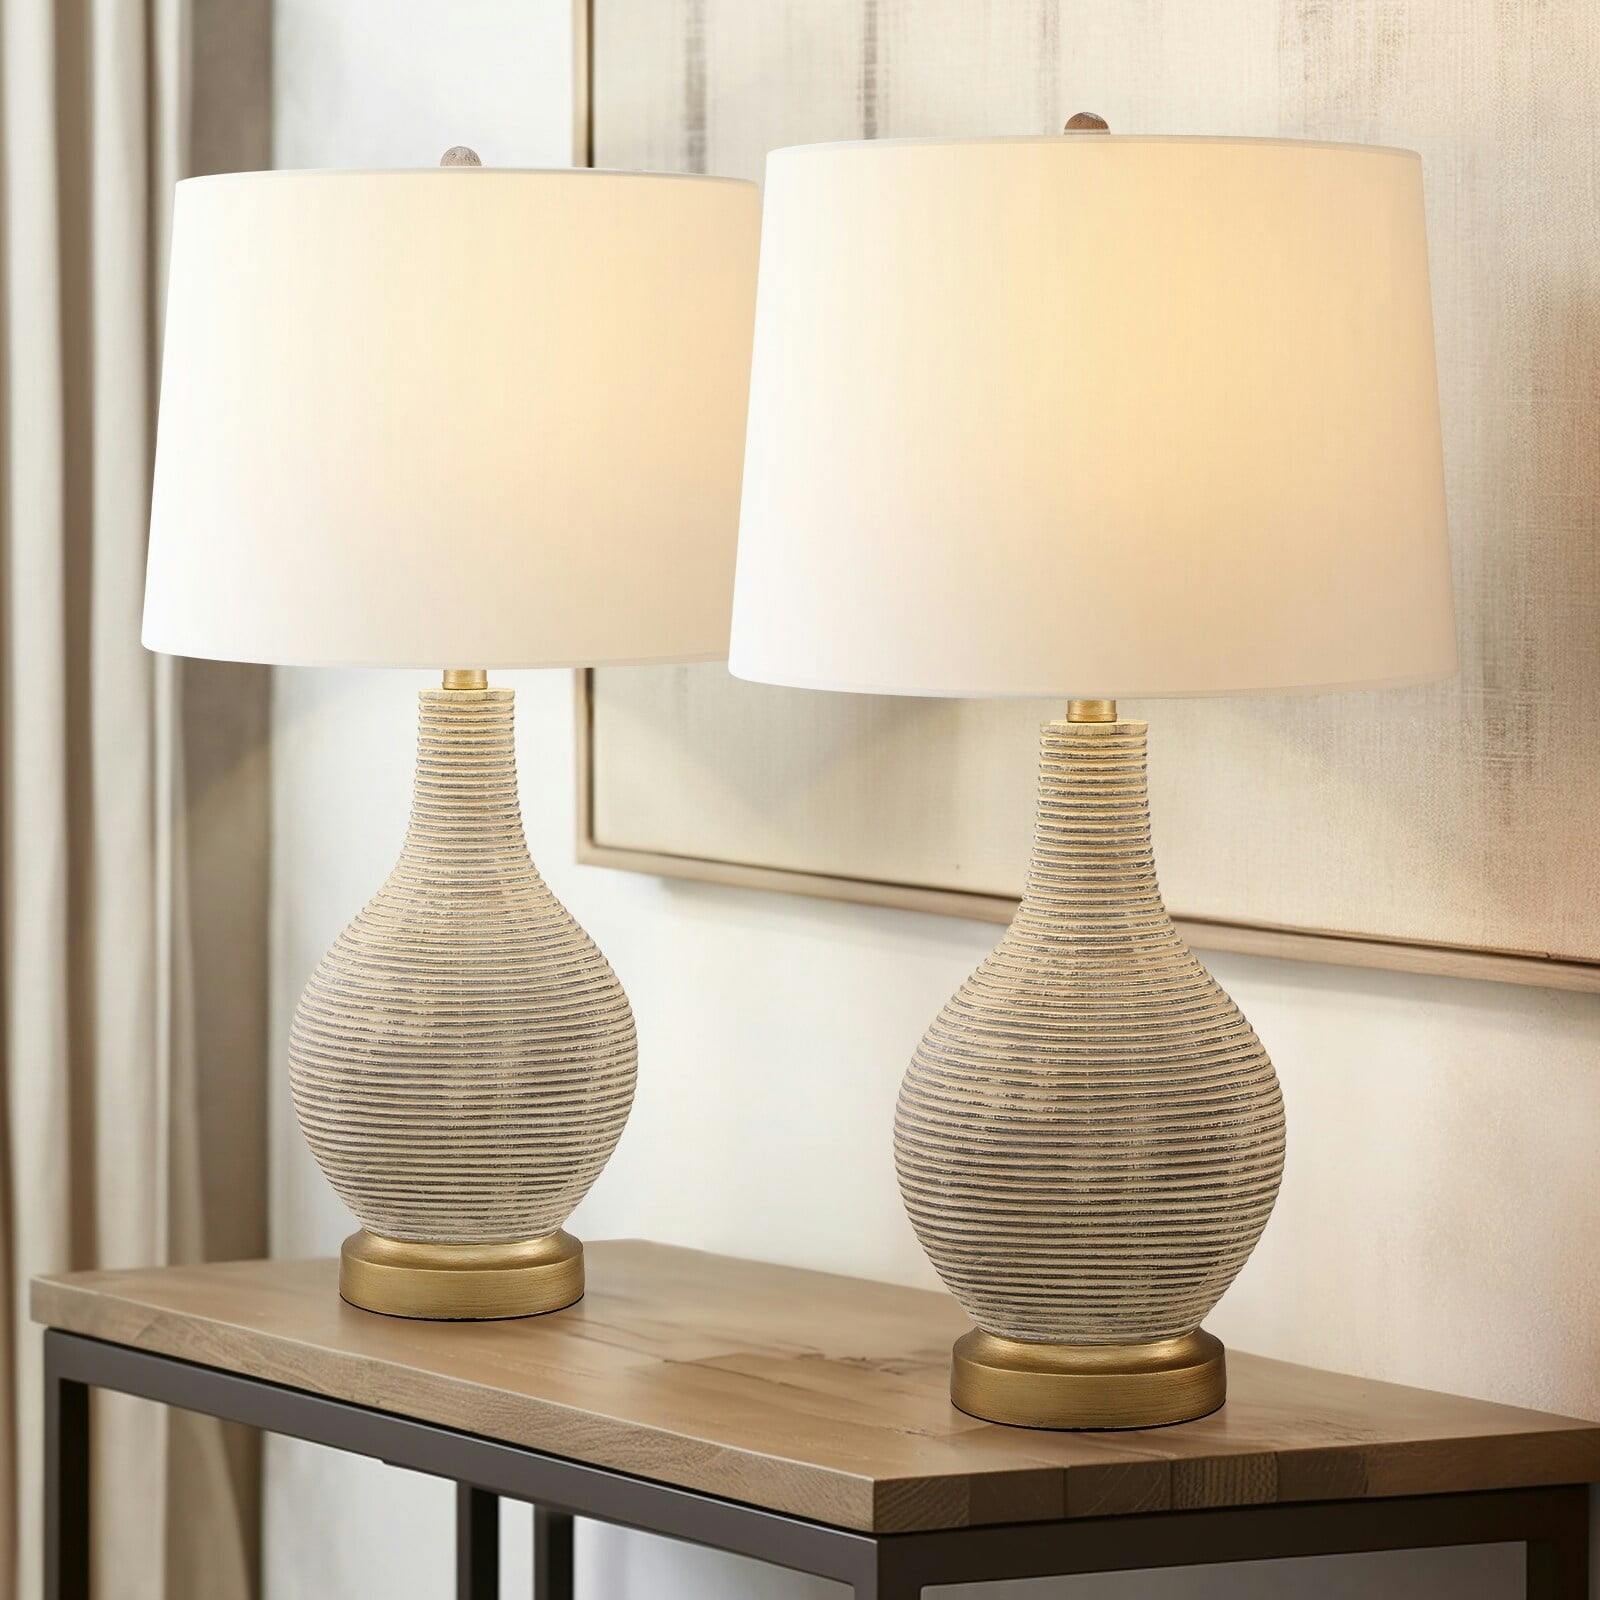 Elegant Beige and Gold 24.5" Farmhouse Table Lamp Set with White Linen Shades